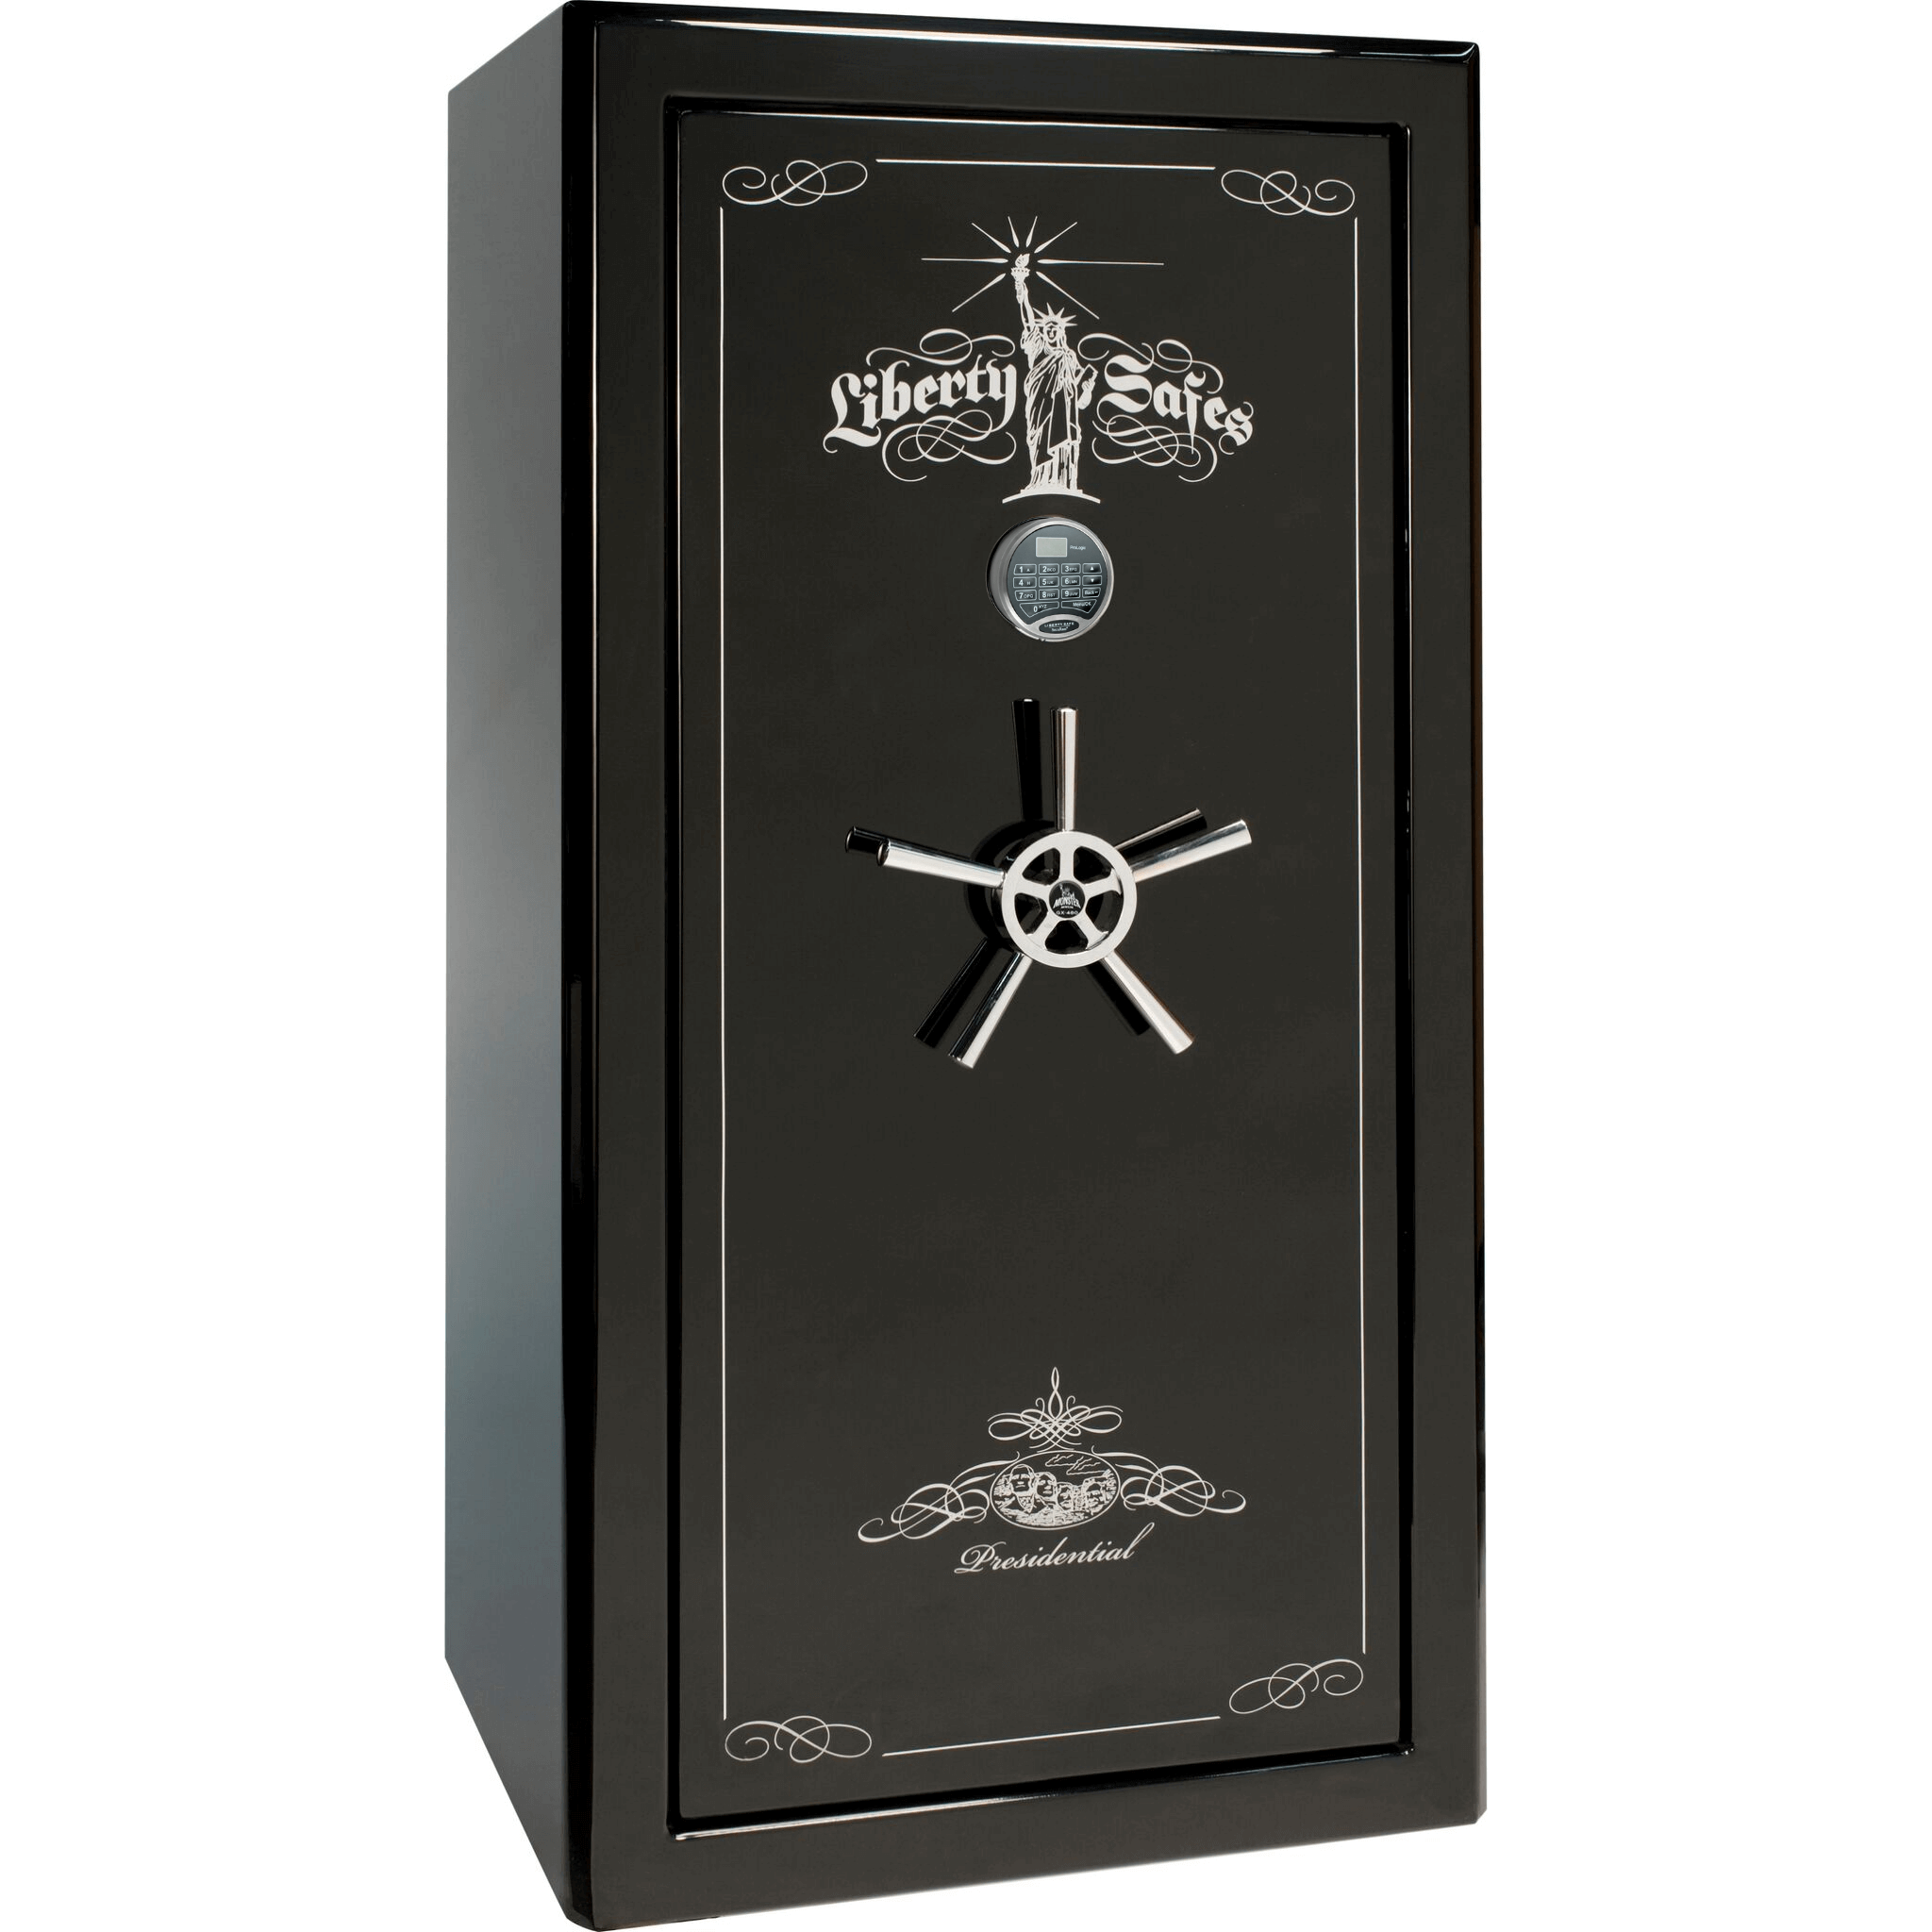 Presidential Series | Level 8 Security | 2.5 Hours Fire Protection | 25 | Dimensions: 60.5"(H) x 30.25"(W) x 28.5"(D) | Black Gloss Chrome Hardware | Electronic Lock